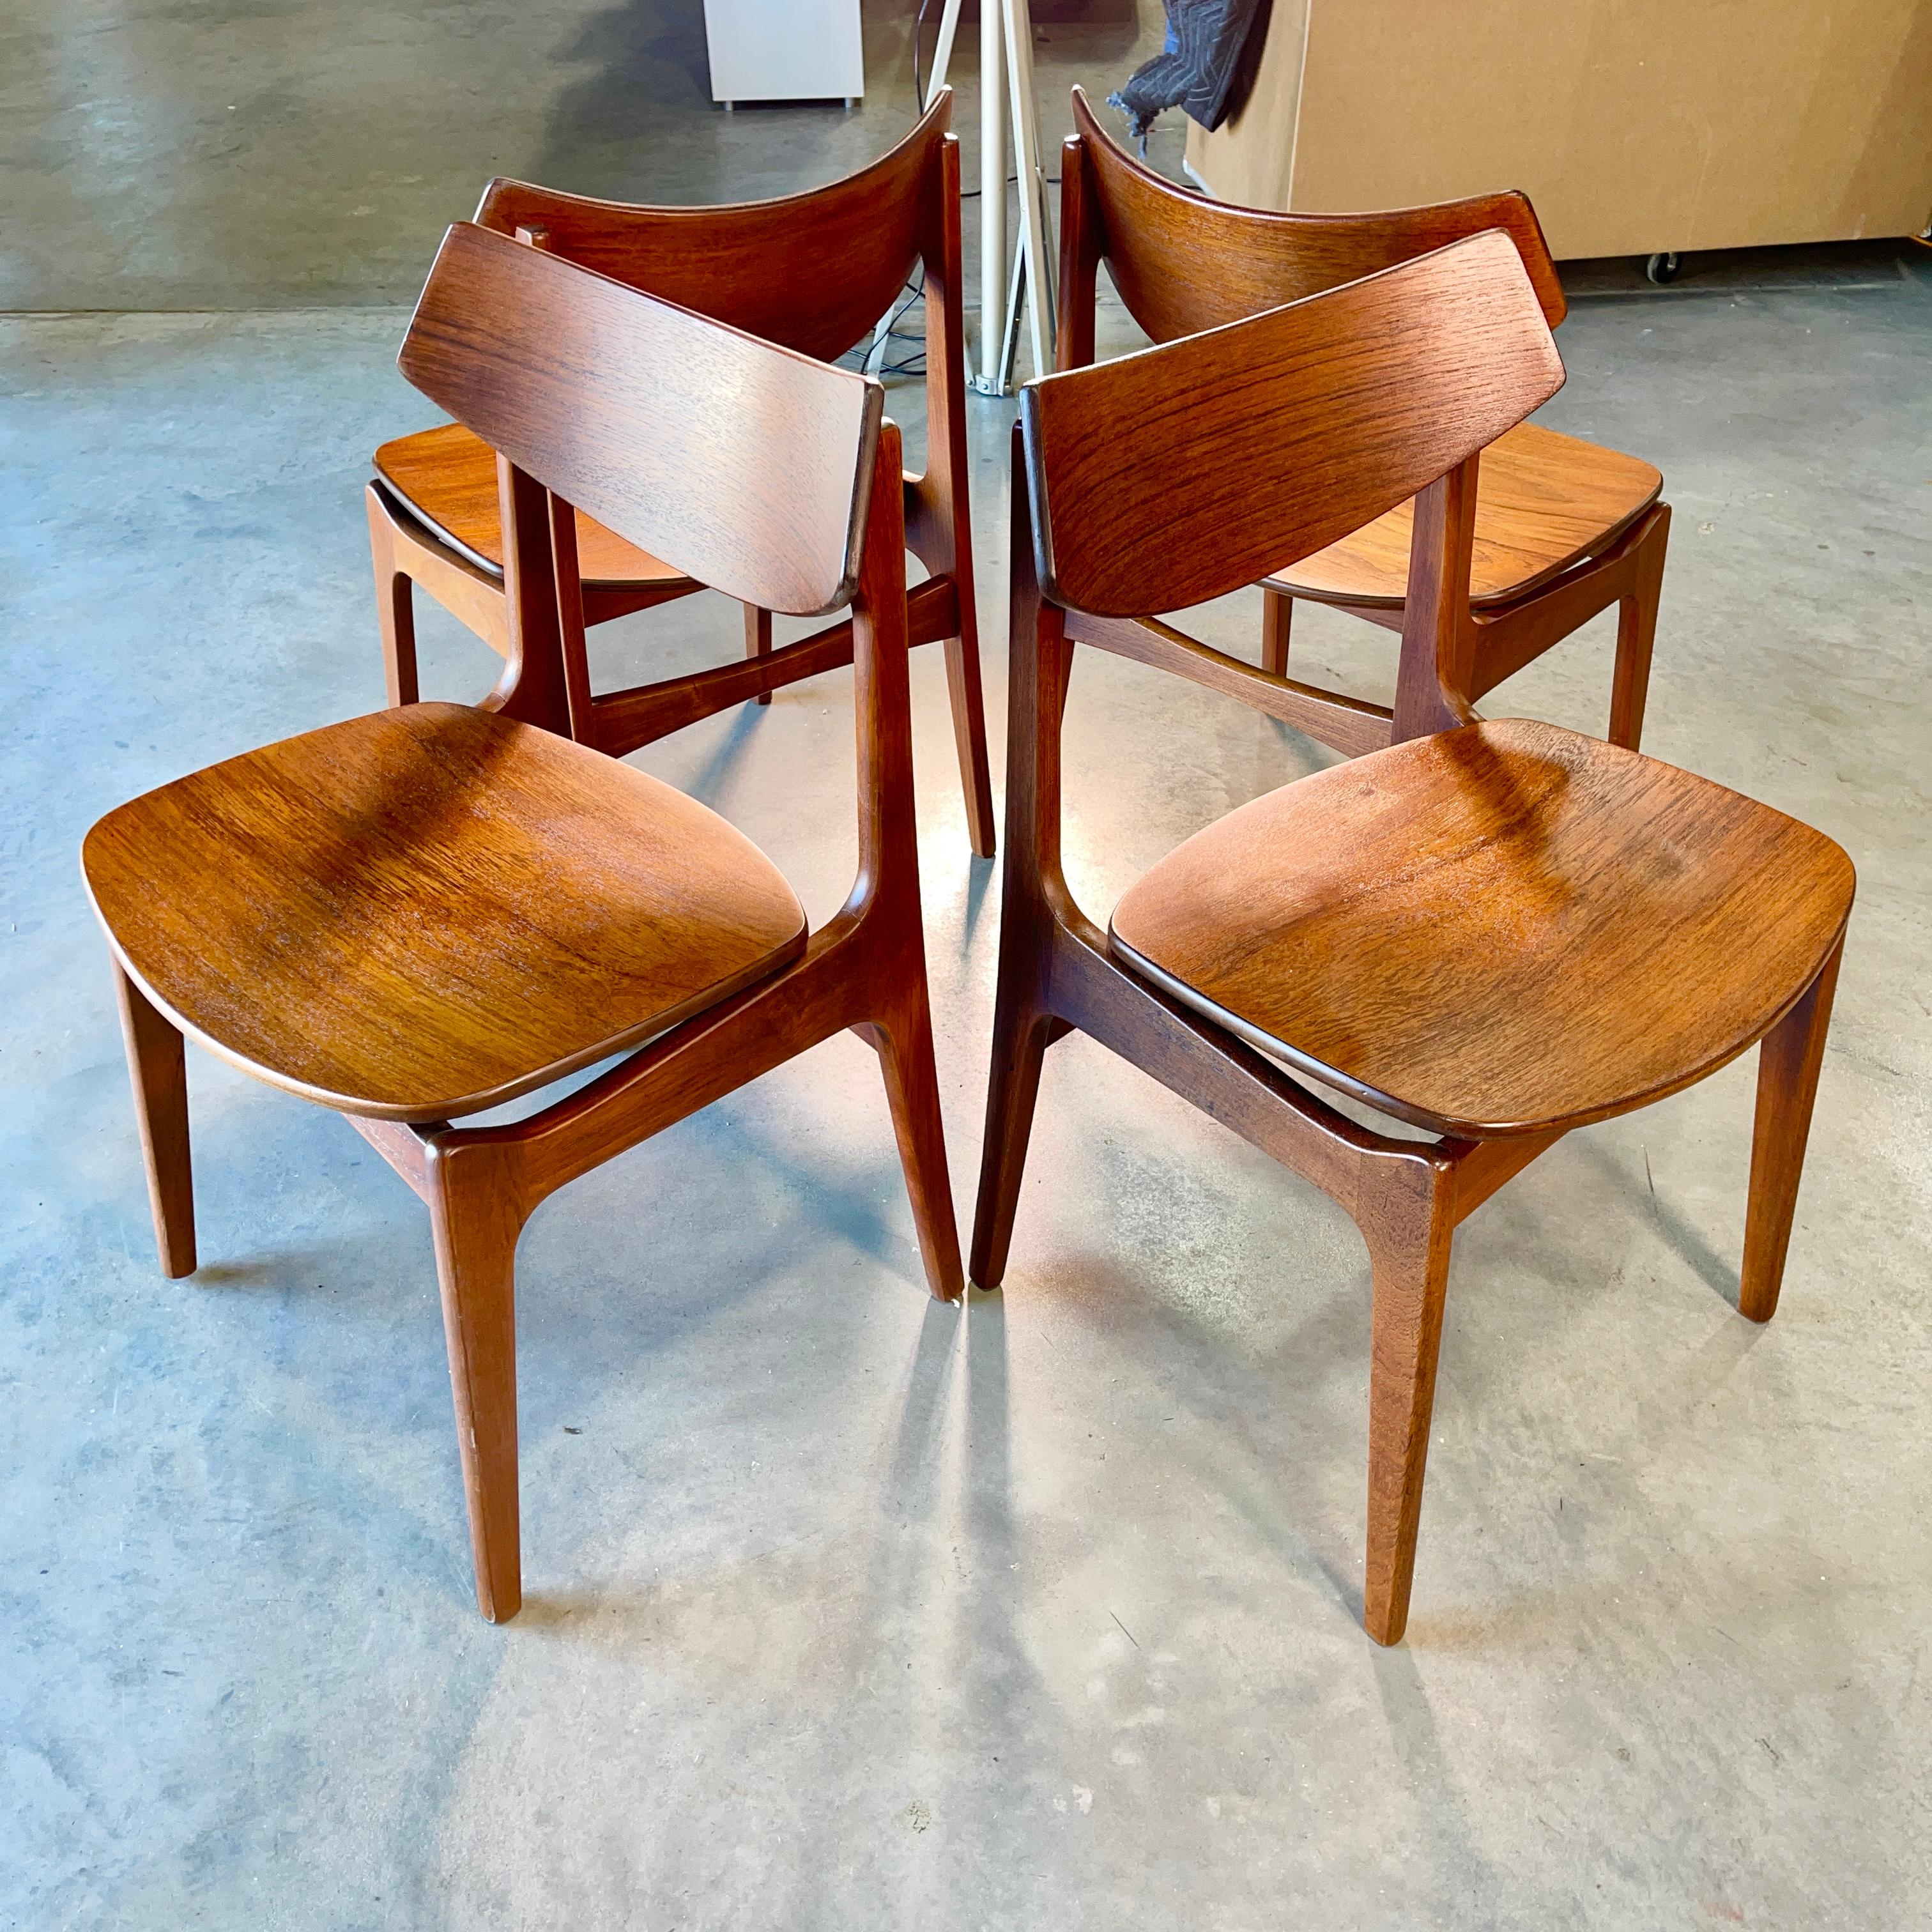 Mid-20th Century Set of 4 Teak Dining Chairs by Erik Buch for Funder-Schmidt & Madsen, Odense